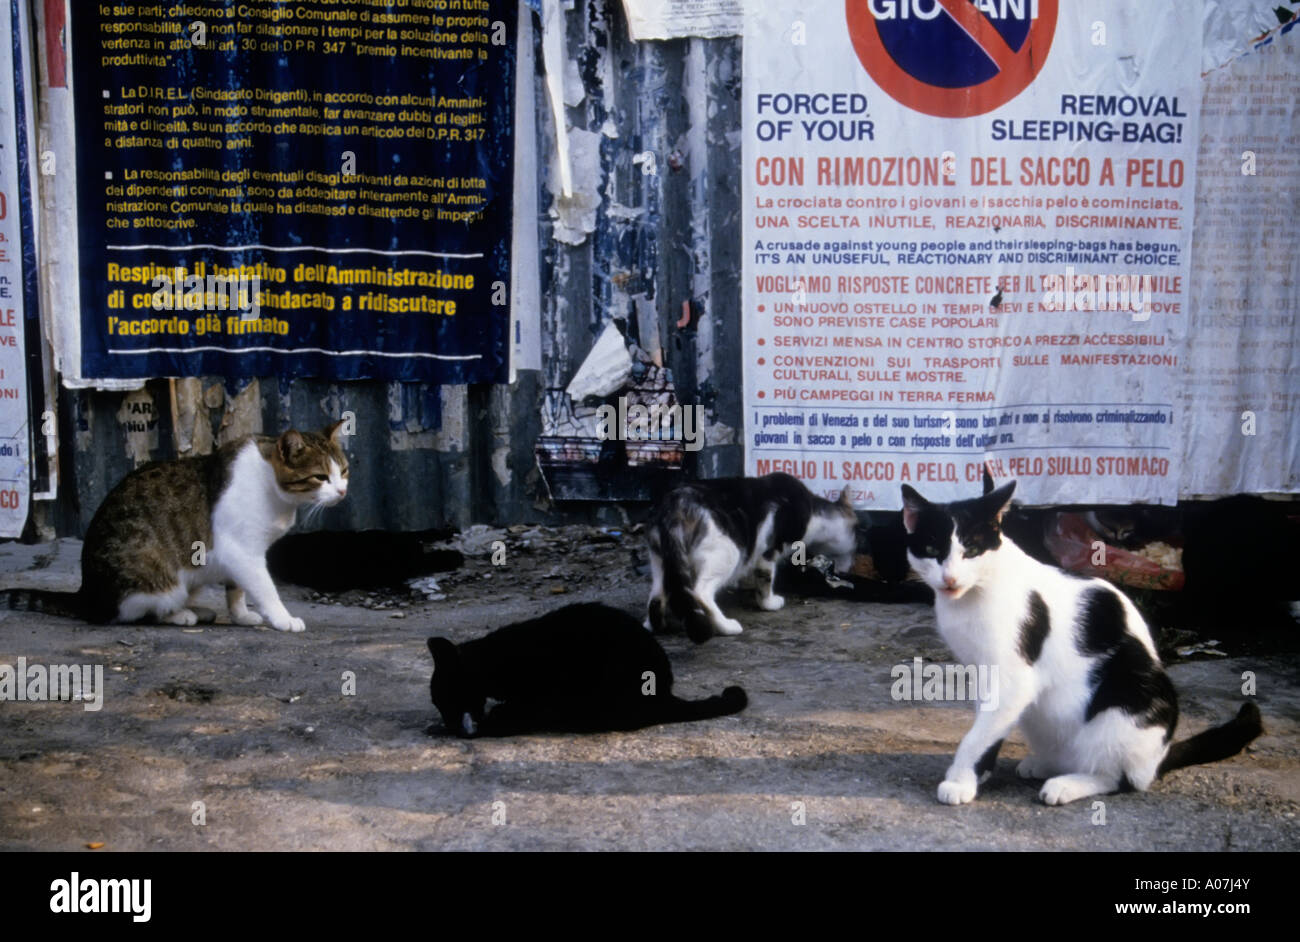 Stray cats and notice that police will take sleeping bags from young people  staying overnight Venice Italy Stock Photo - Alamy